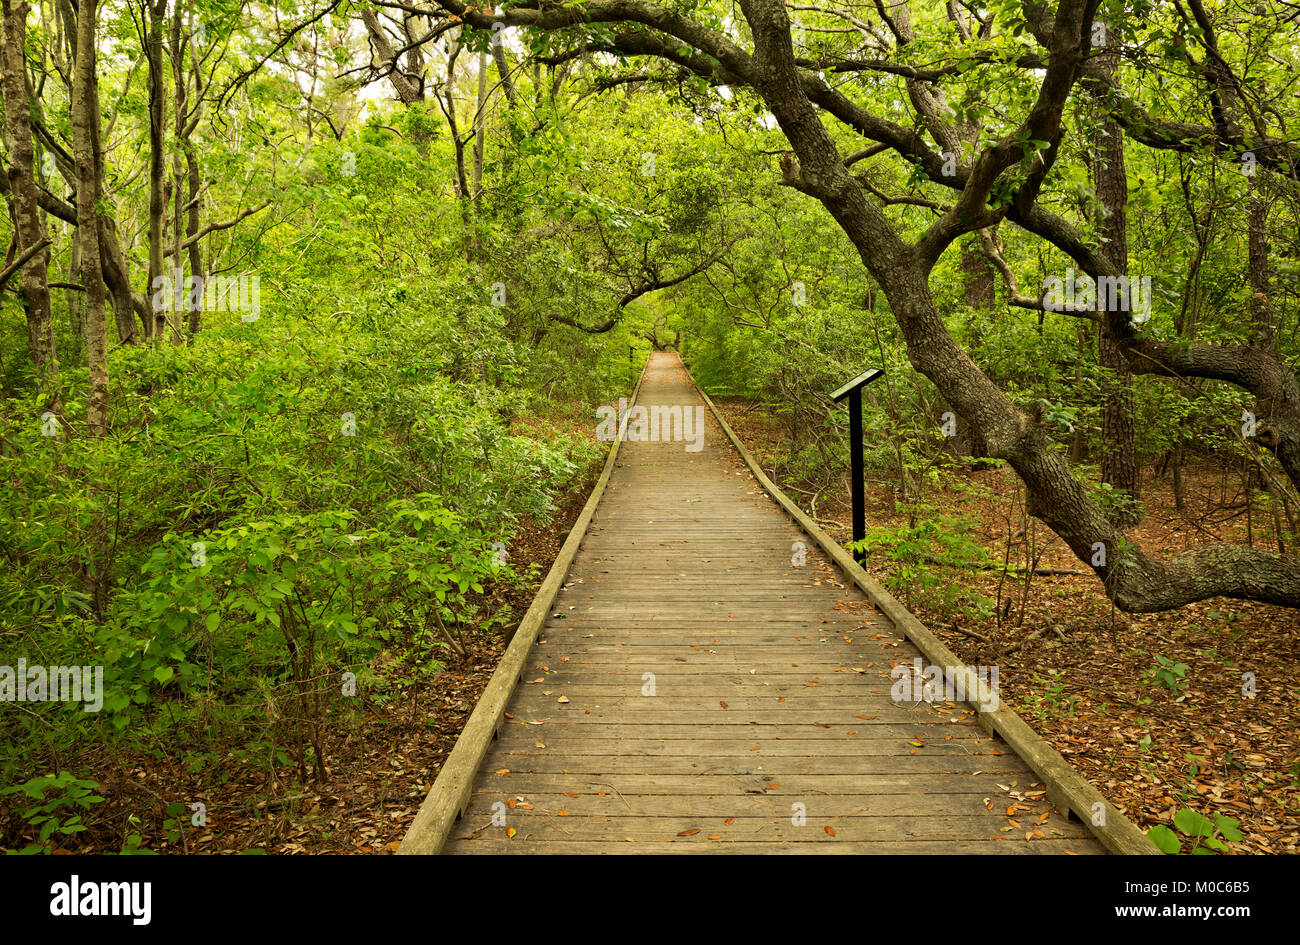 NC01375-00...NORTH CAROLINA - Boardwalk trail through an oak and loblolly pine forest at the Currituck Banks Reserve on the Outer Banks at Corrola. Stock Photo